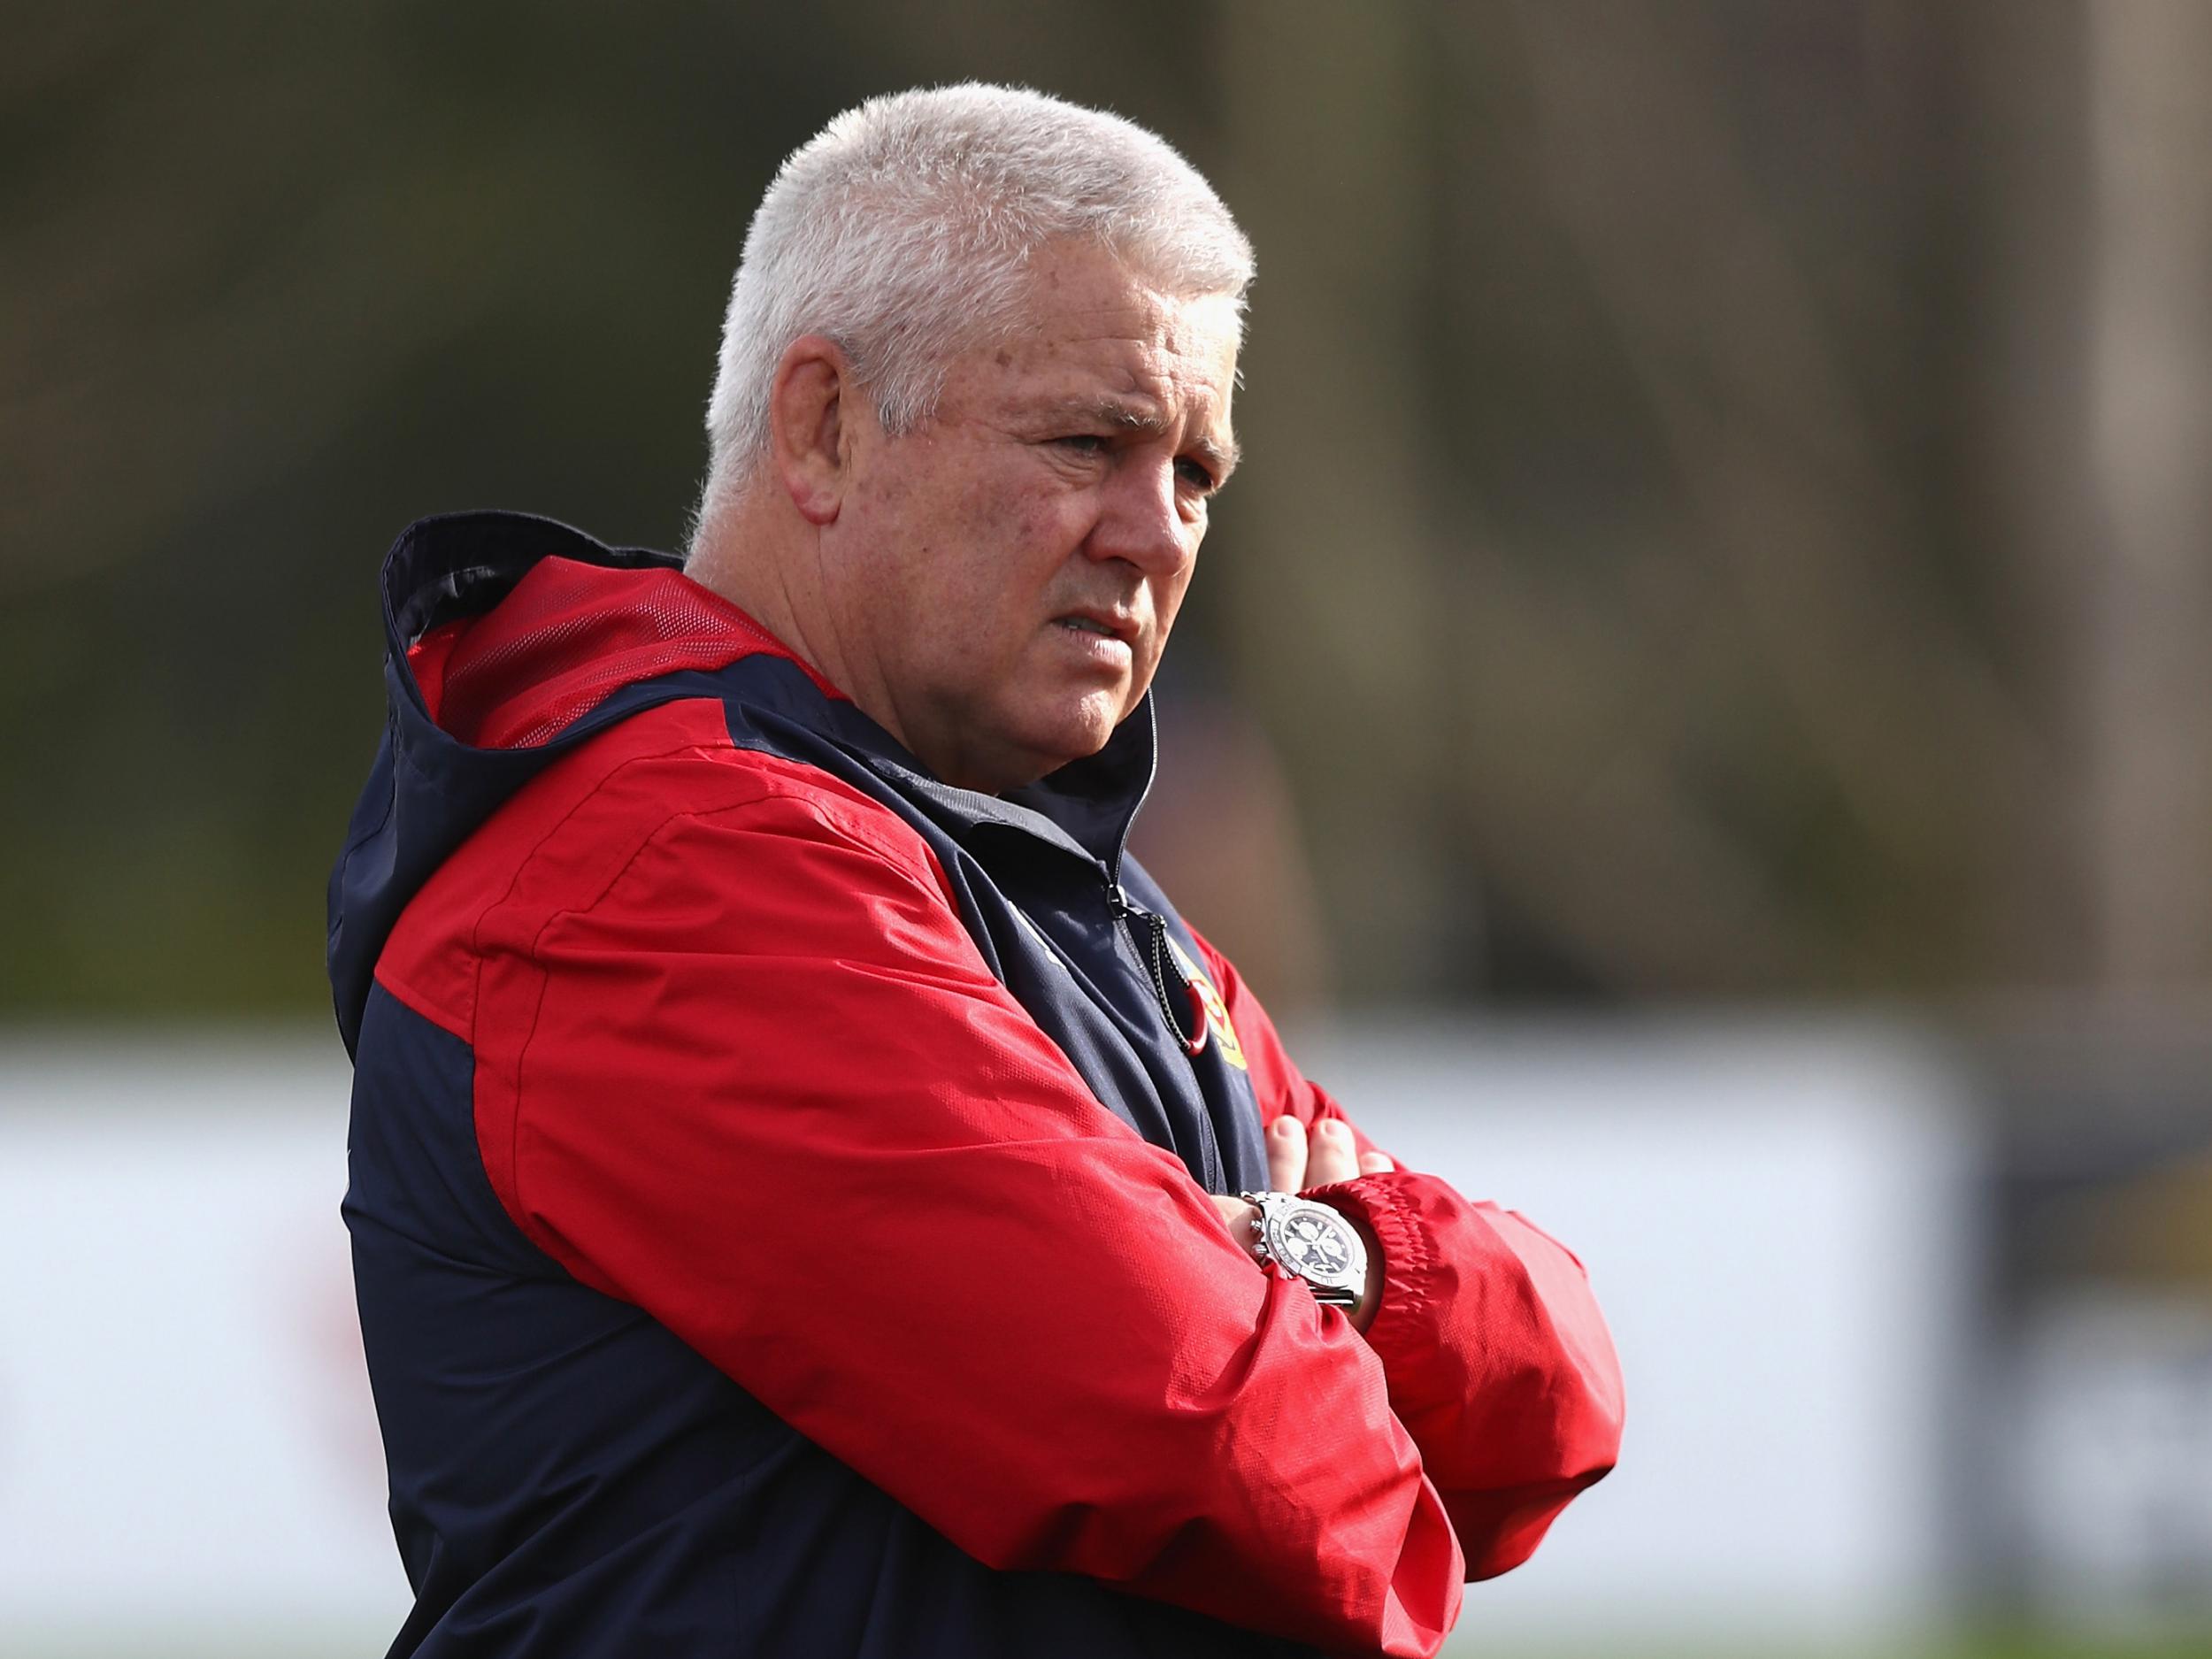 Gatland has much to ponder ahead of naming his Test side on Thursday